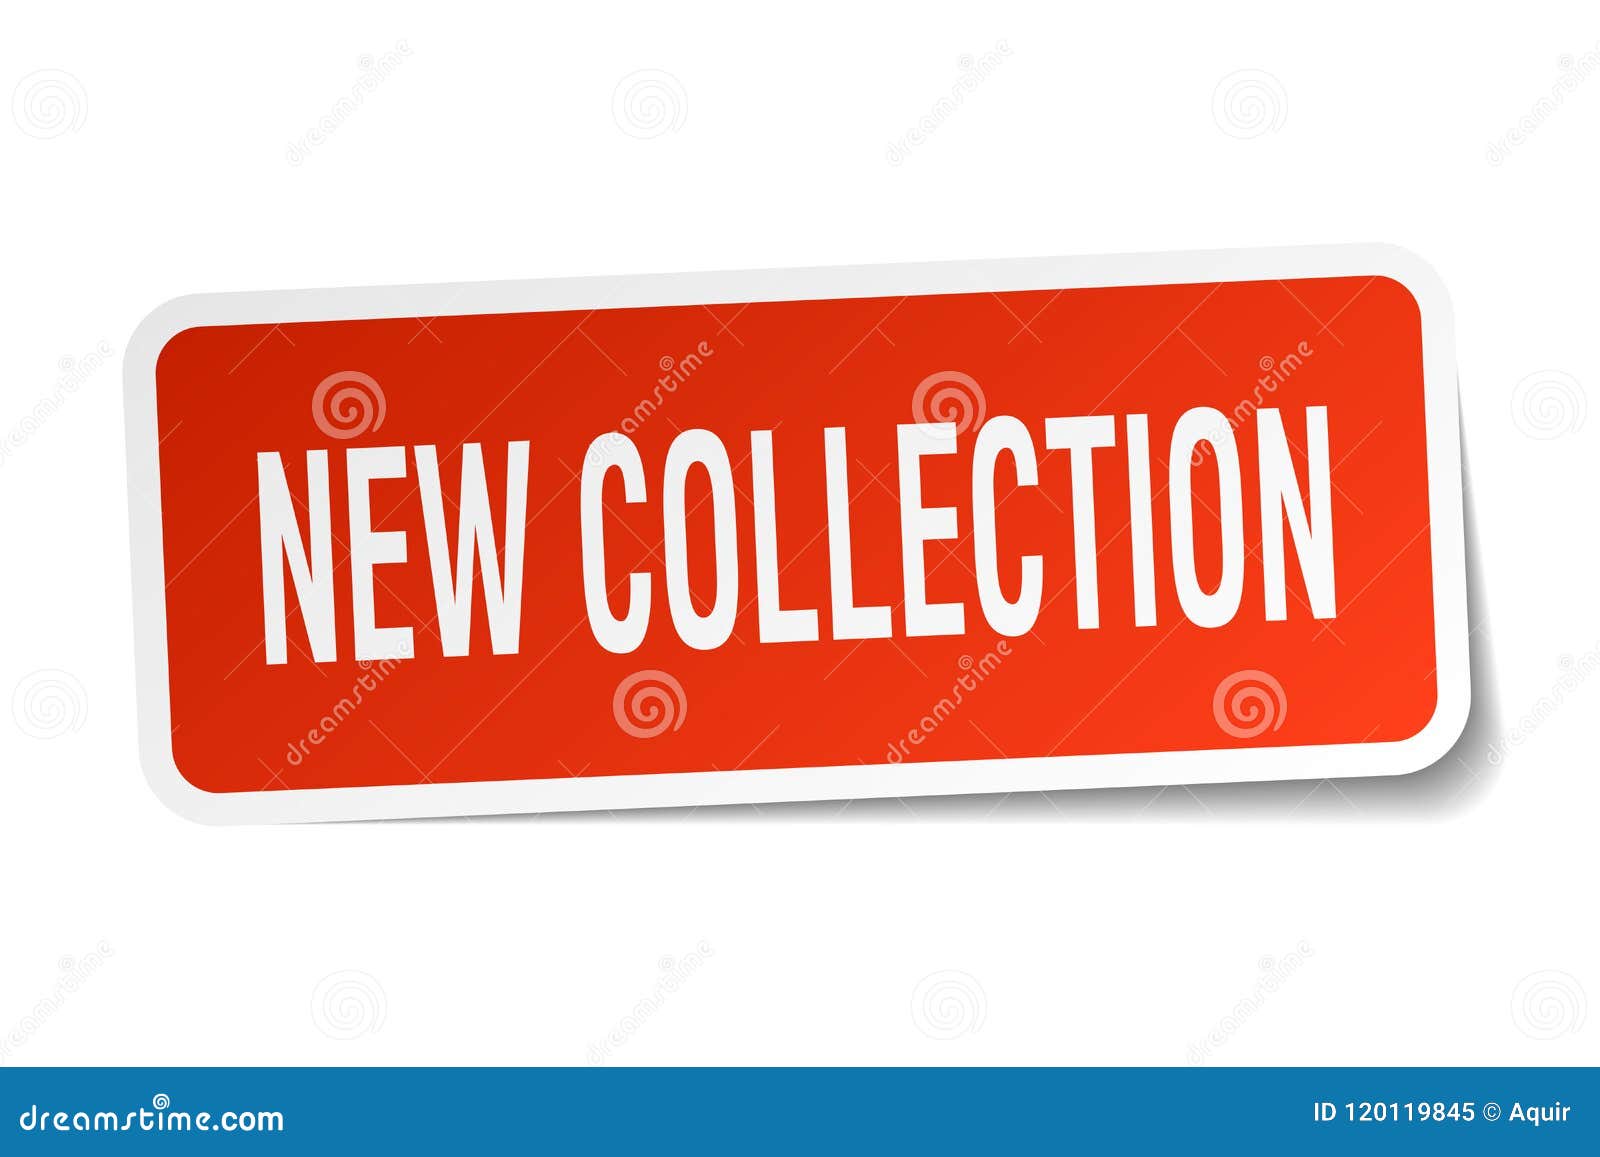 New collection sticker stock vector. Illustration of collection - 120119845